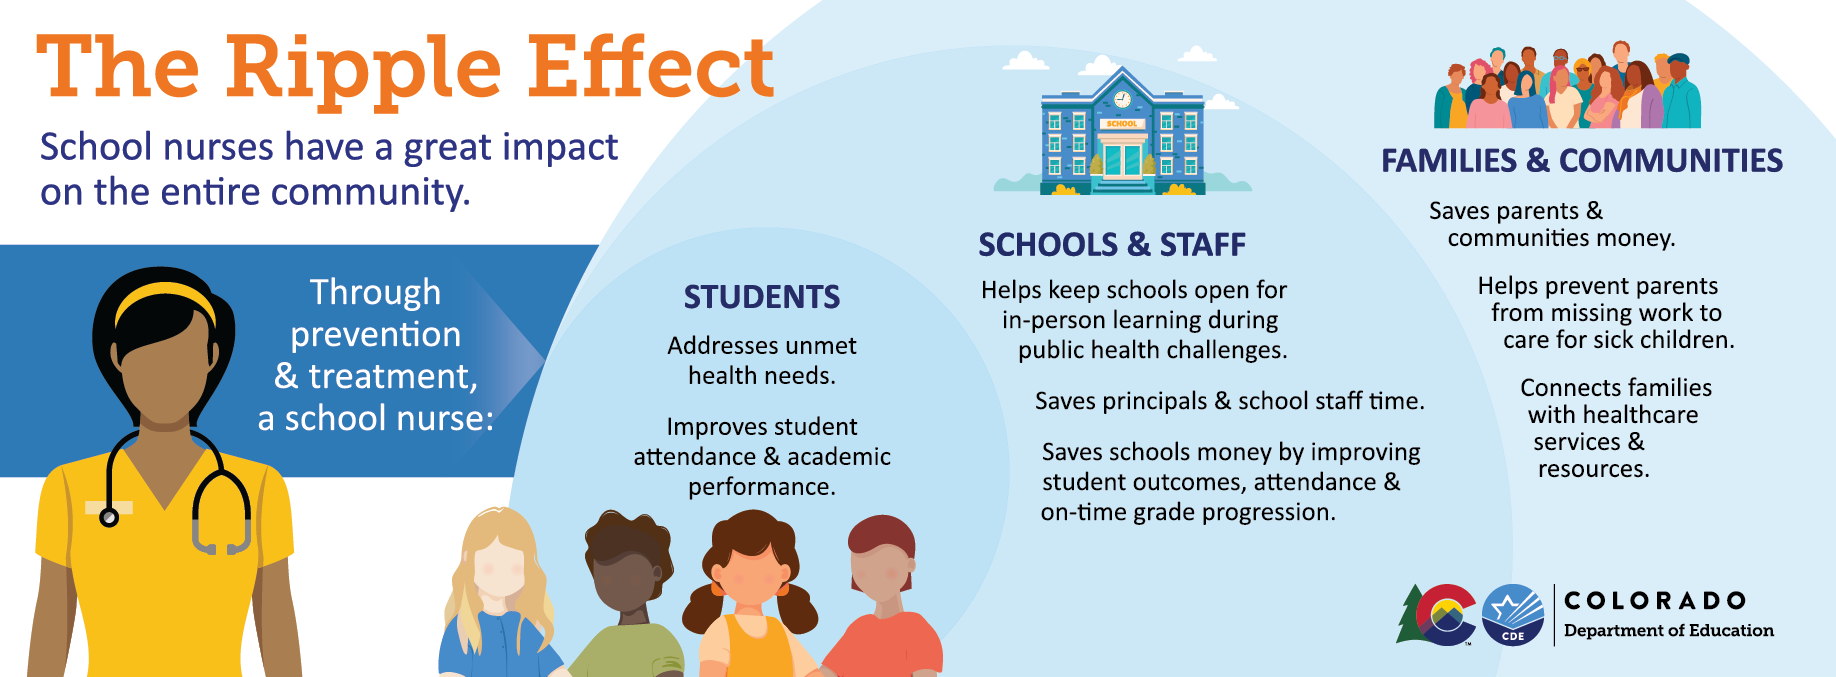 Ripple Effect infographic about the impact school nurses have on a community. Alt text at http://www.cde.state.co.us/communications/alttext-schoolnurserippleeffect#english